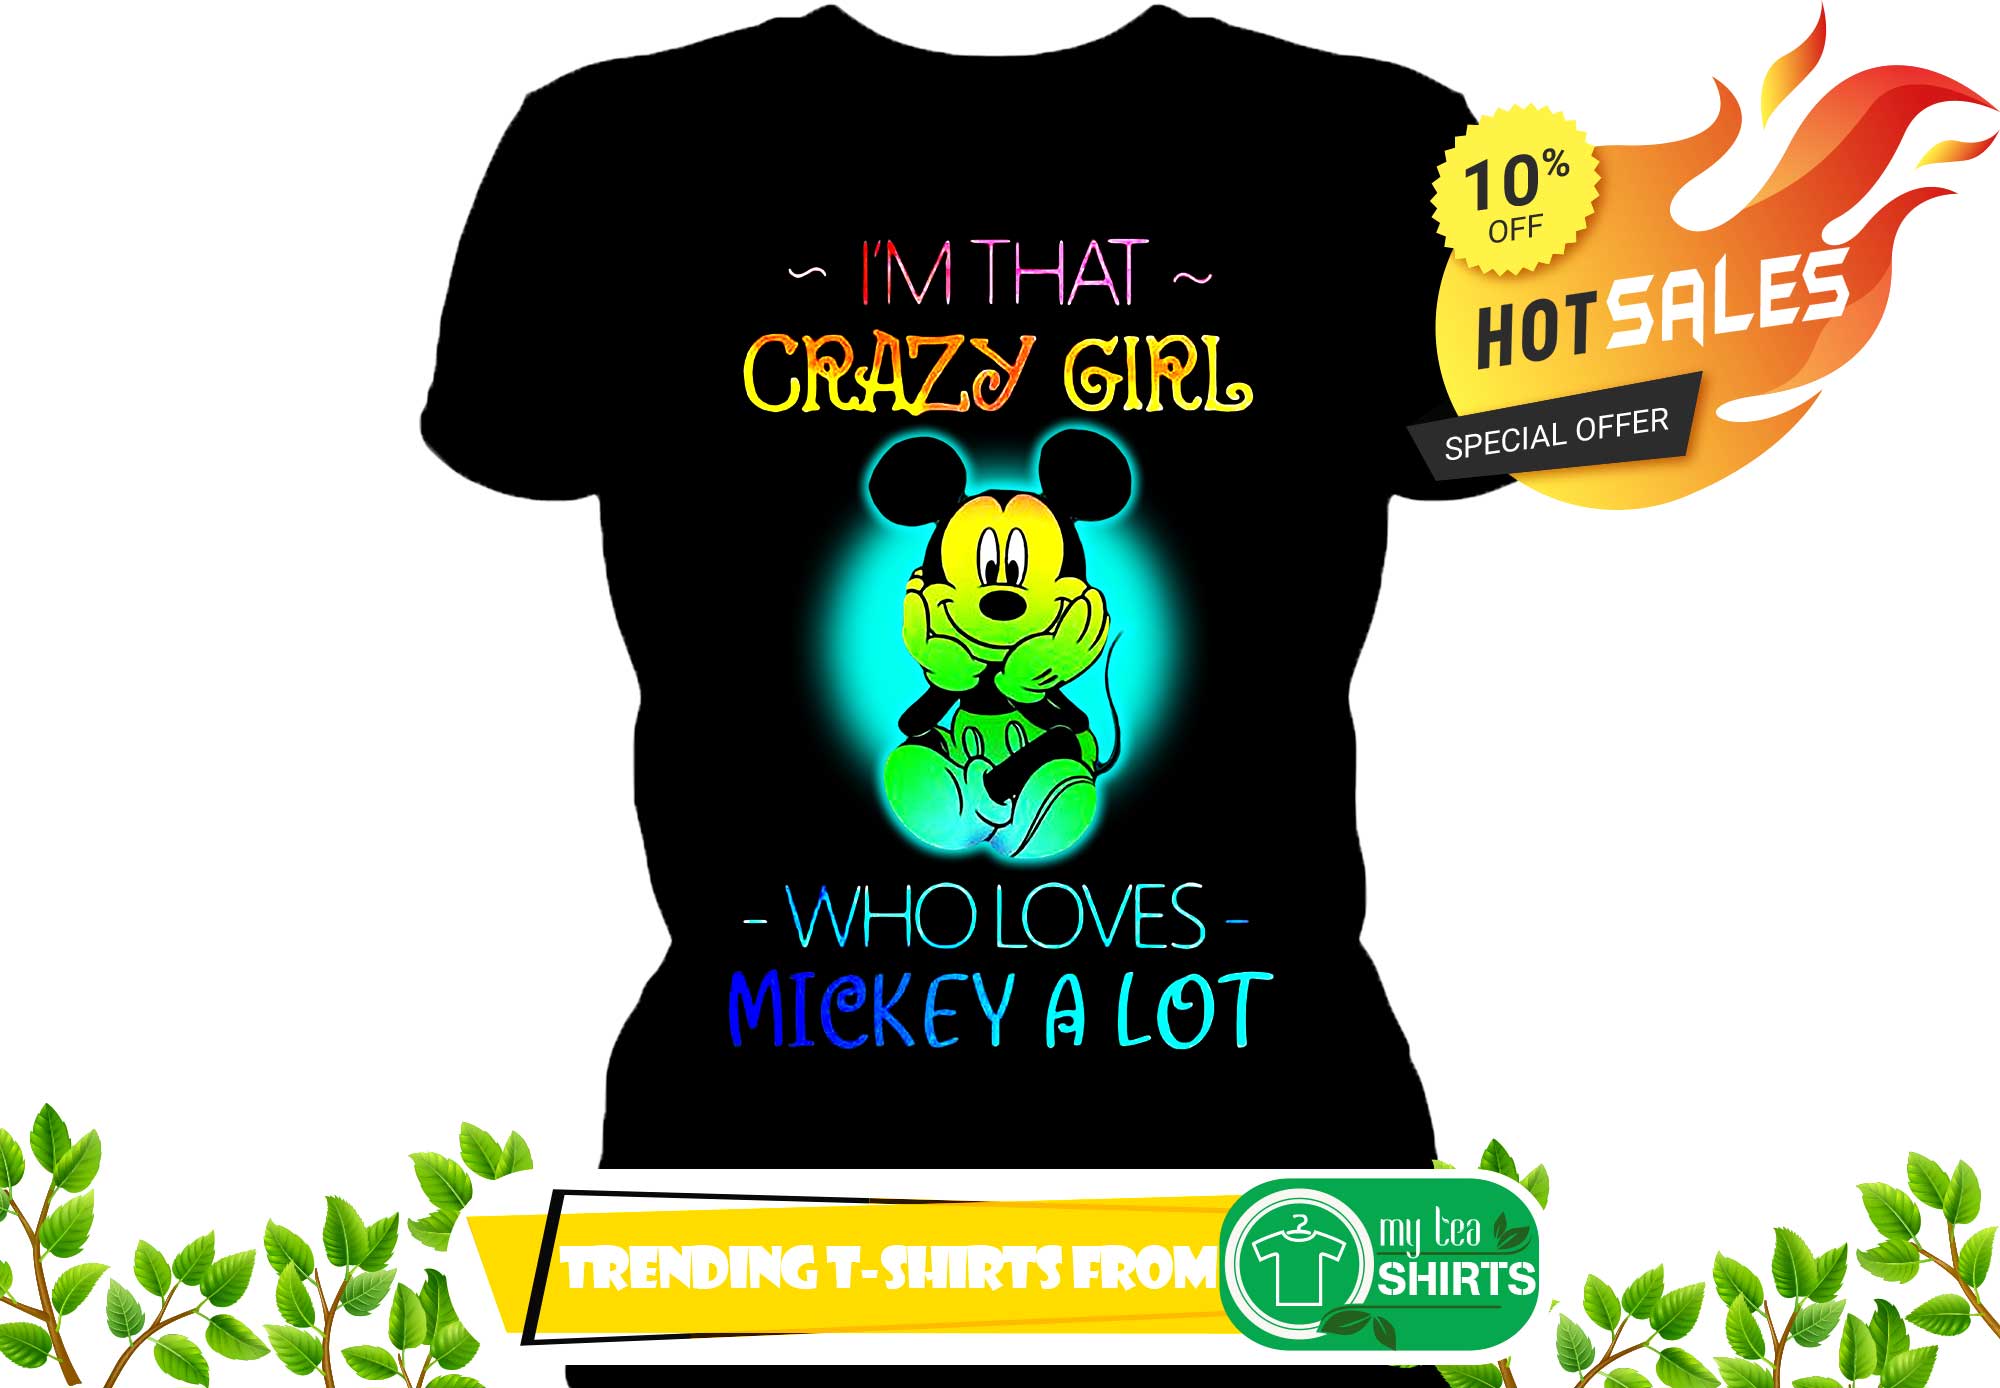 I'm that crazy girl who loves Mickey a lot shirt